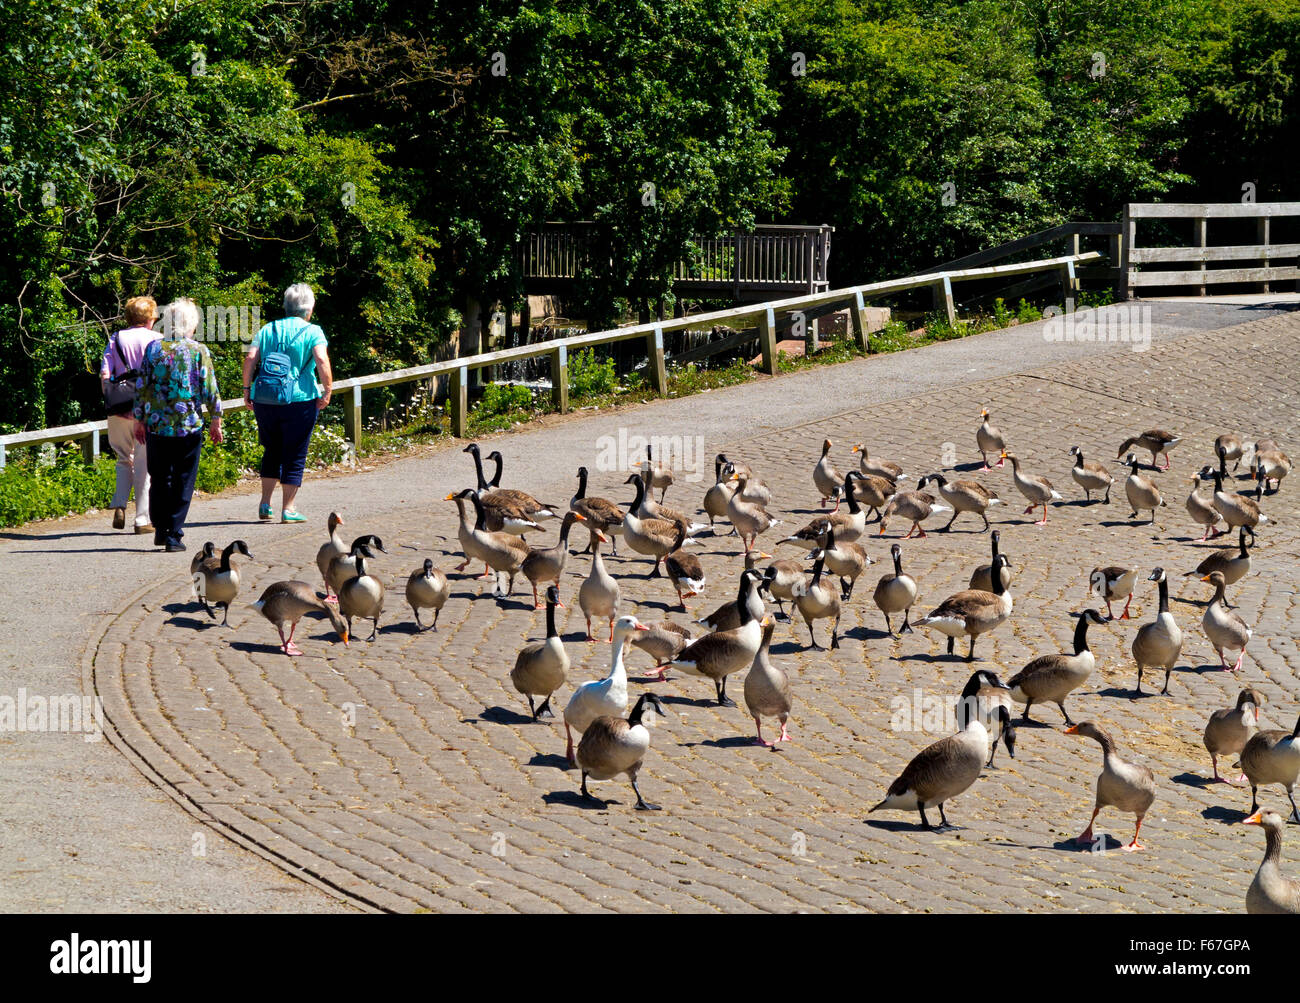 Women walking past a flock of Canada geese Branta canadensis at Rufford Country Park near Ollerton in Nottinghamshire England UK Stock Photo